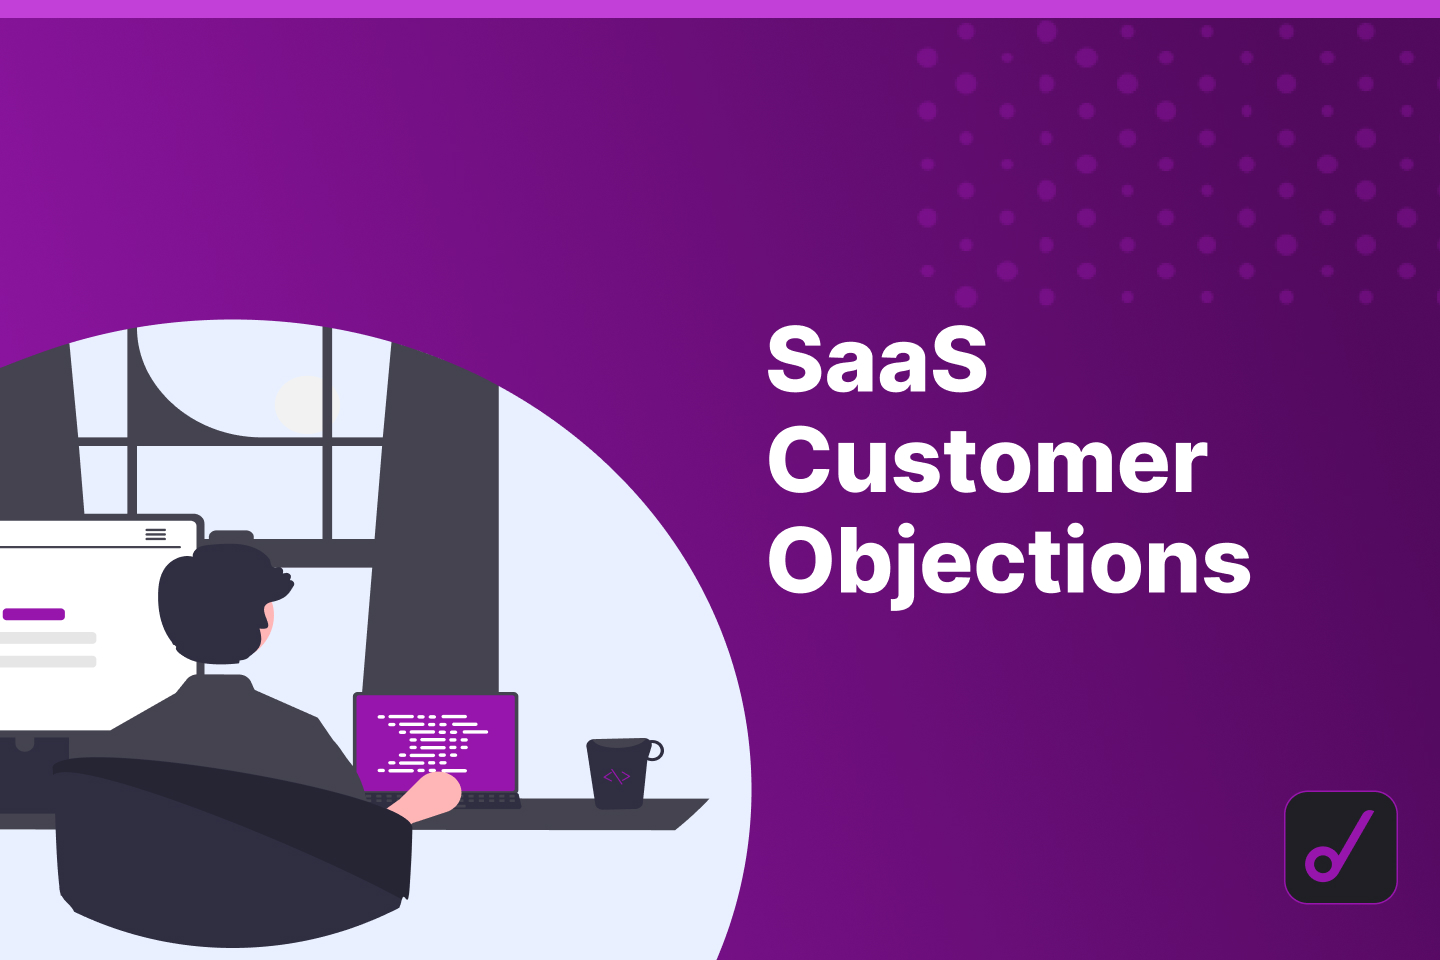 A Guide on How to Resolve These 5 Common SaaS Customer Objections